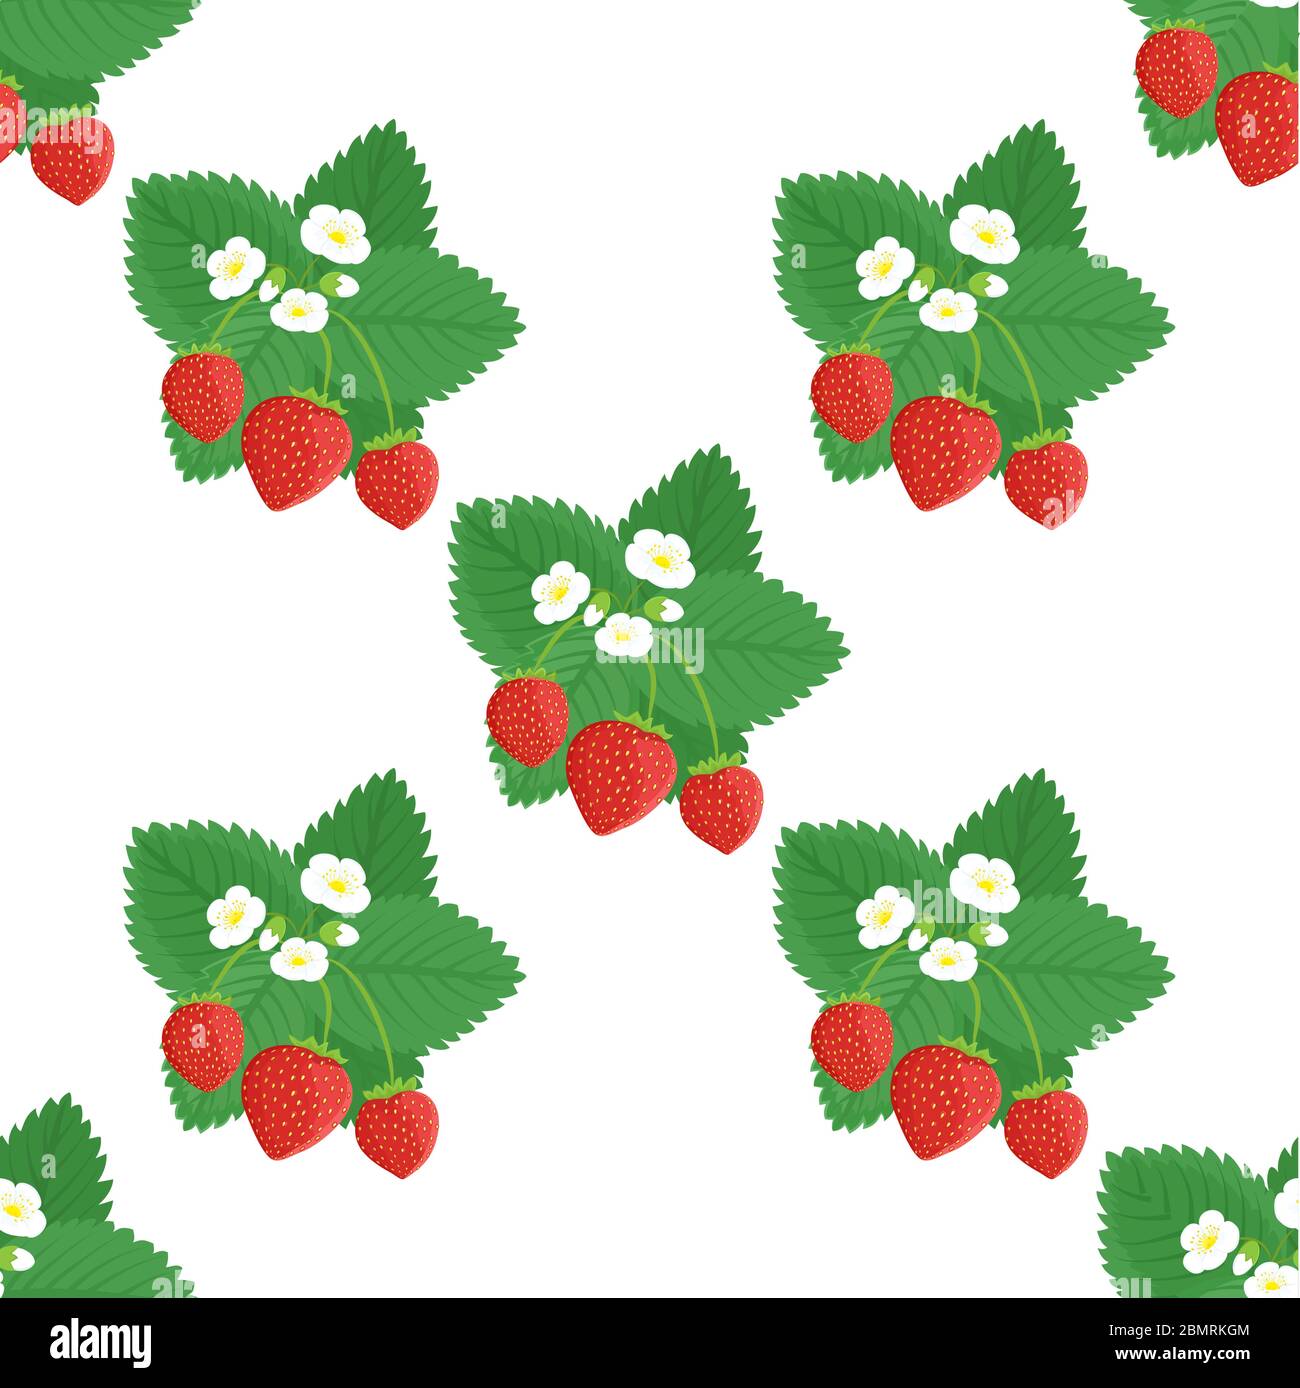 Strawberry with red berries and white flowers seamless vector pattern, background Stock Vector